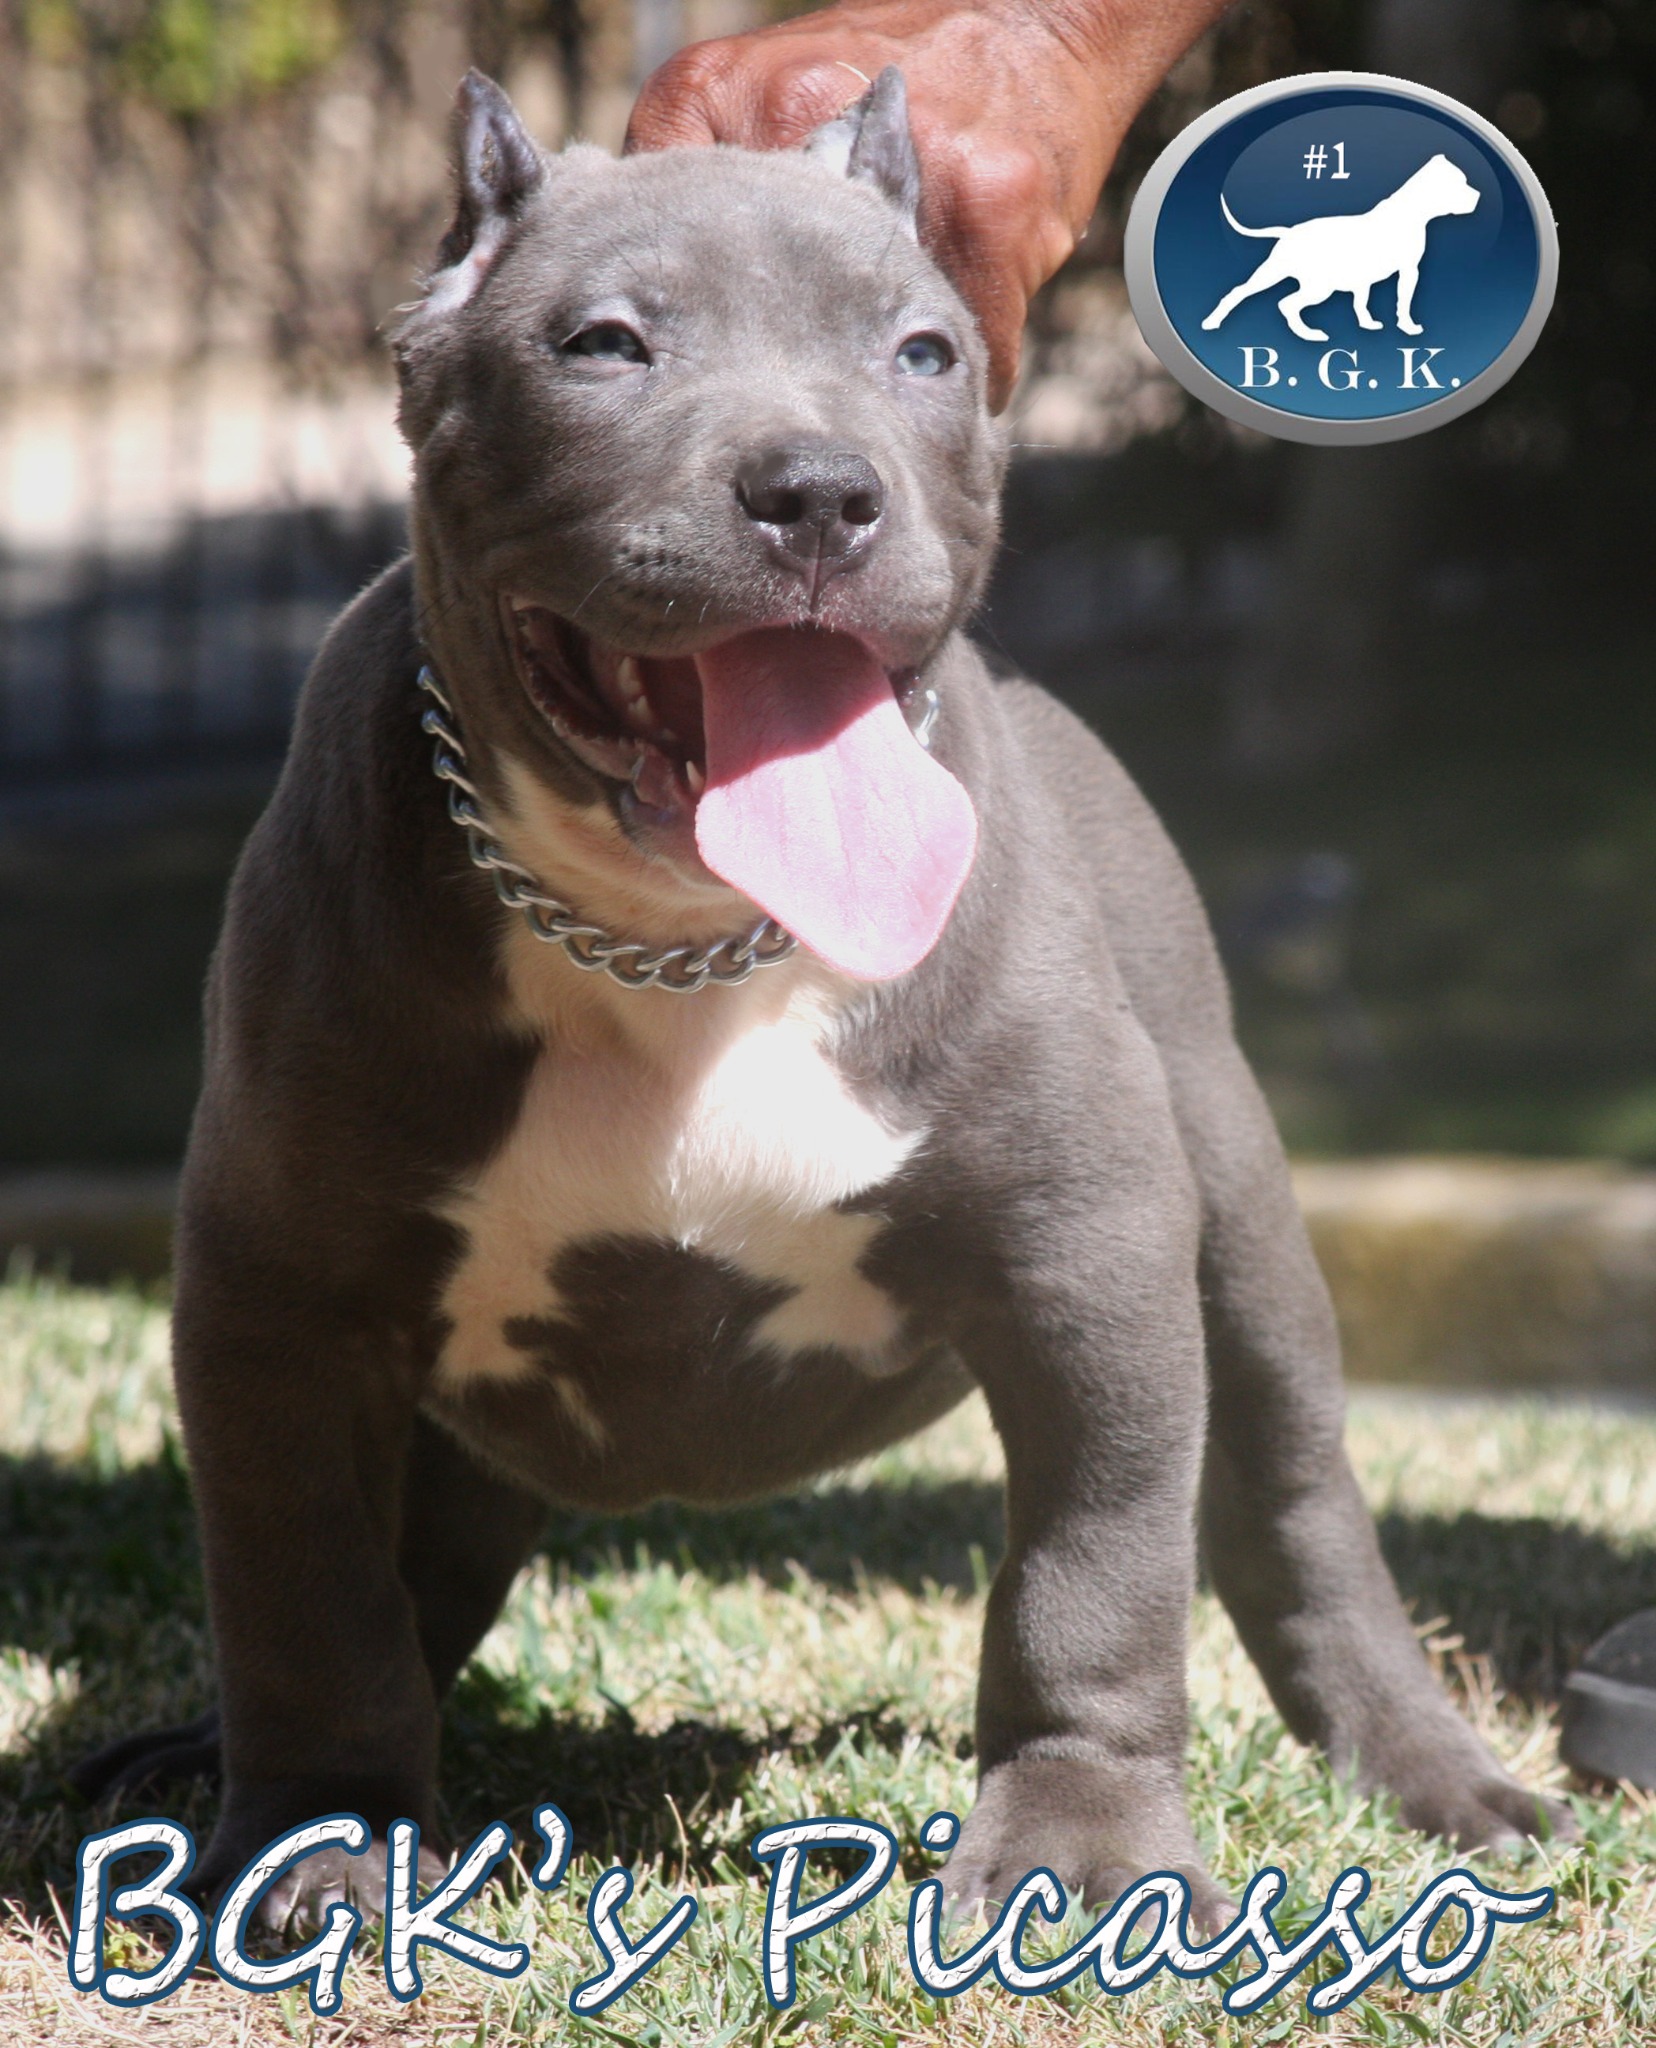 Big Gemini Kennels on Twitter: "This is my choice from the litter BGK's  Picasso, future 120+ lb bully pitbull. BGK Pitbulls get HUGE, Research  #winning http://t.co/dl7DRzUr" / Twitter